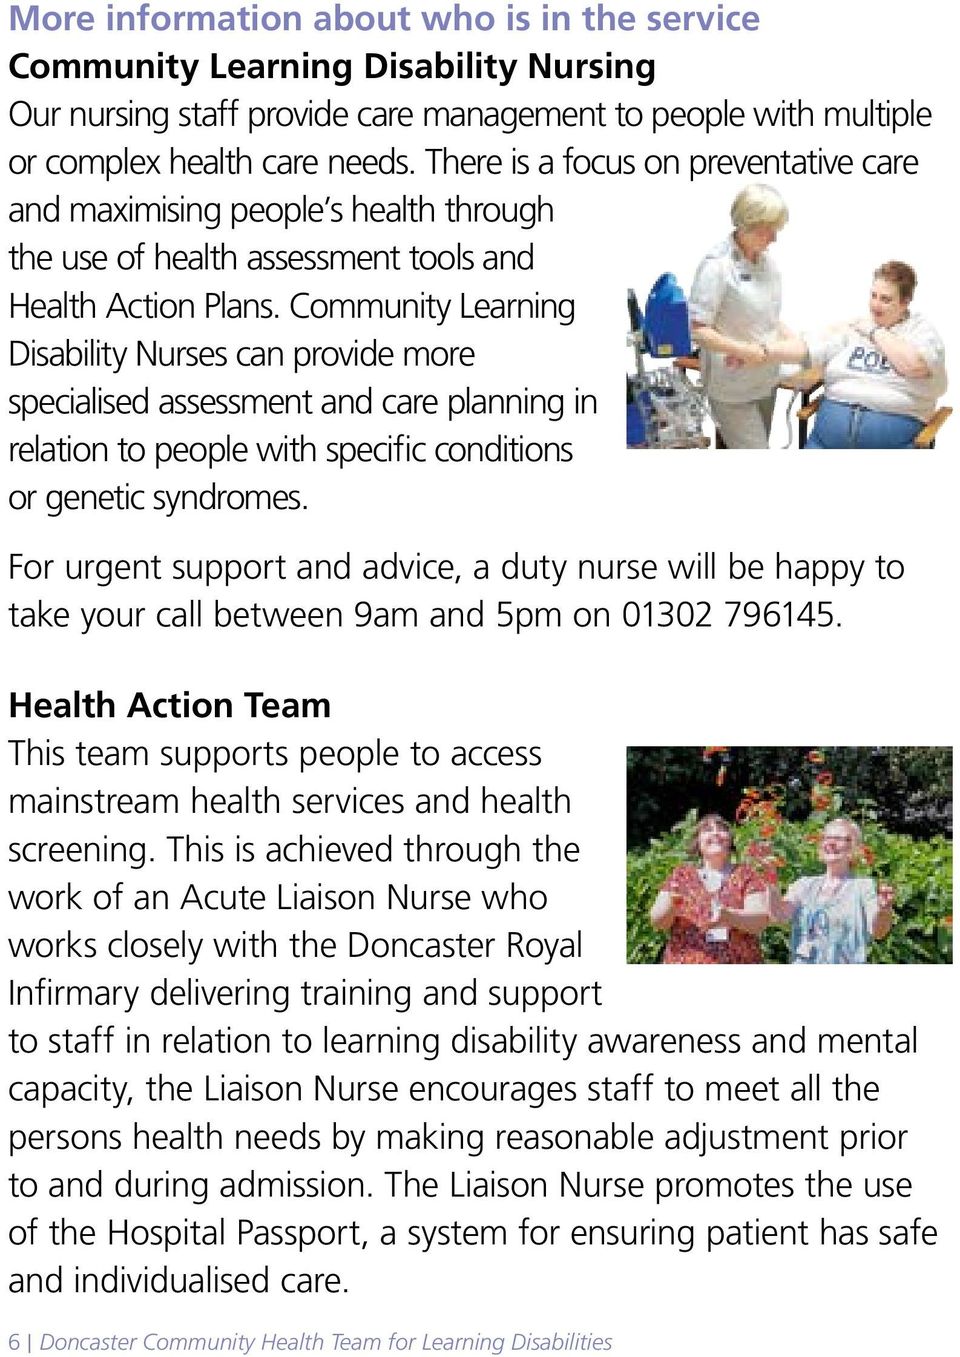 Community Learning Disability Nurses can provide more specialised assessment and care planning in relation to people with specific conditions or genetic syndromes.